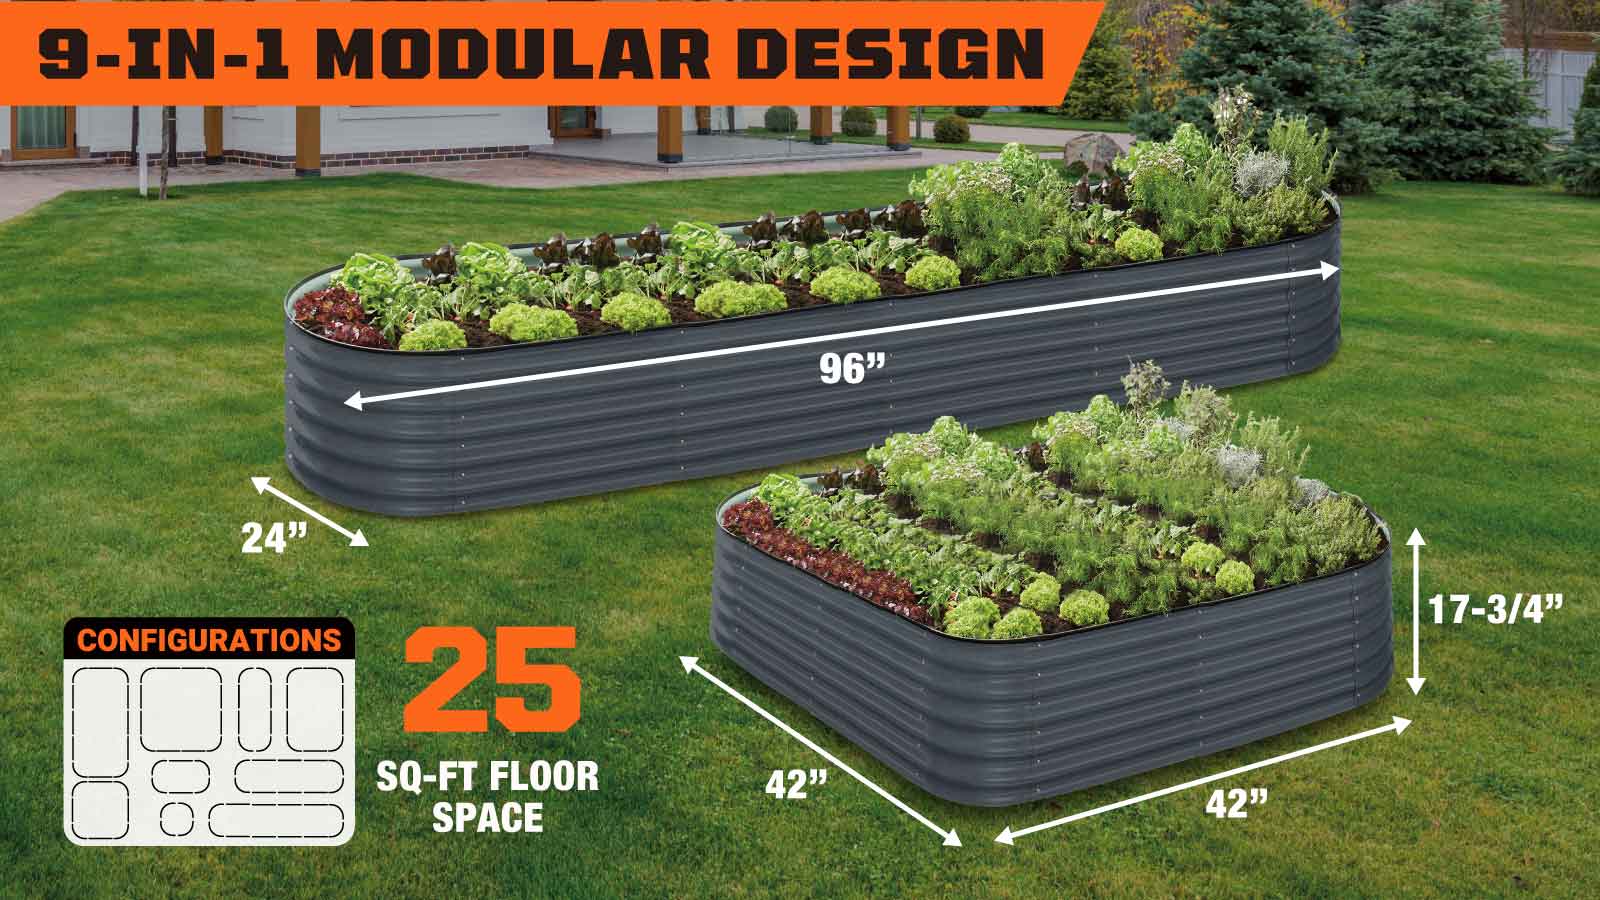 TMG Industrial Metal Raised Garden Bed Kit, 9-In-1 Modular Design, 18” Tall, Galvanized & Powder Coated, Rubber Edging, TMG-MGB96-specifications-image